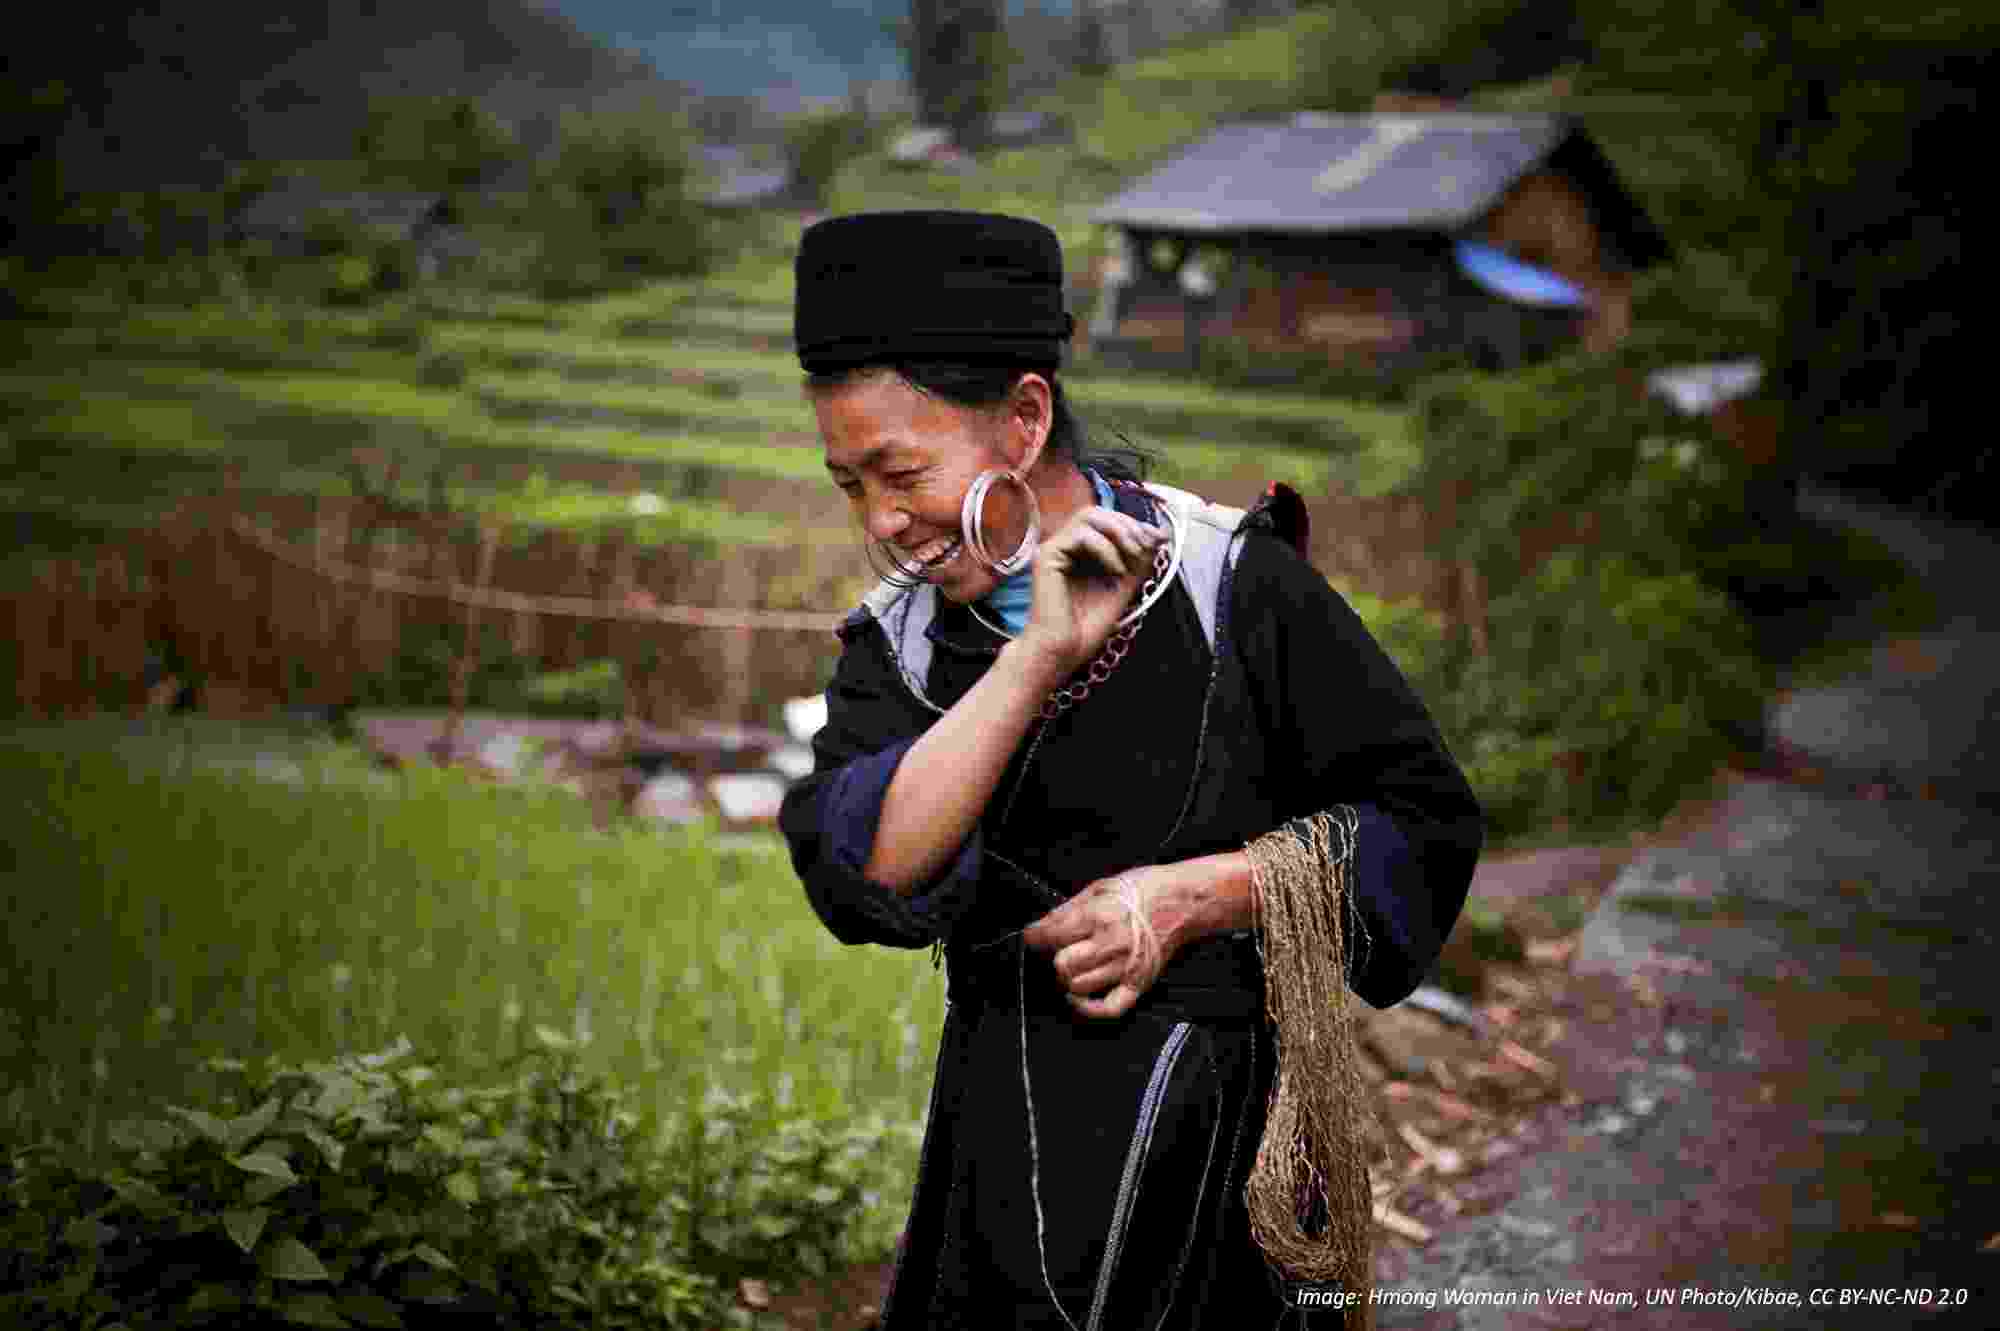 A Hmong hill tribe woman walks along a path between green rice paddy fields, whilst at work in Sin Chai, Viet Nam.